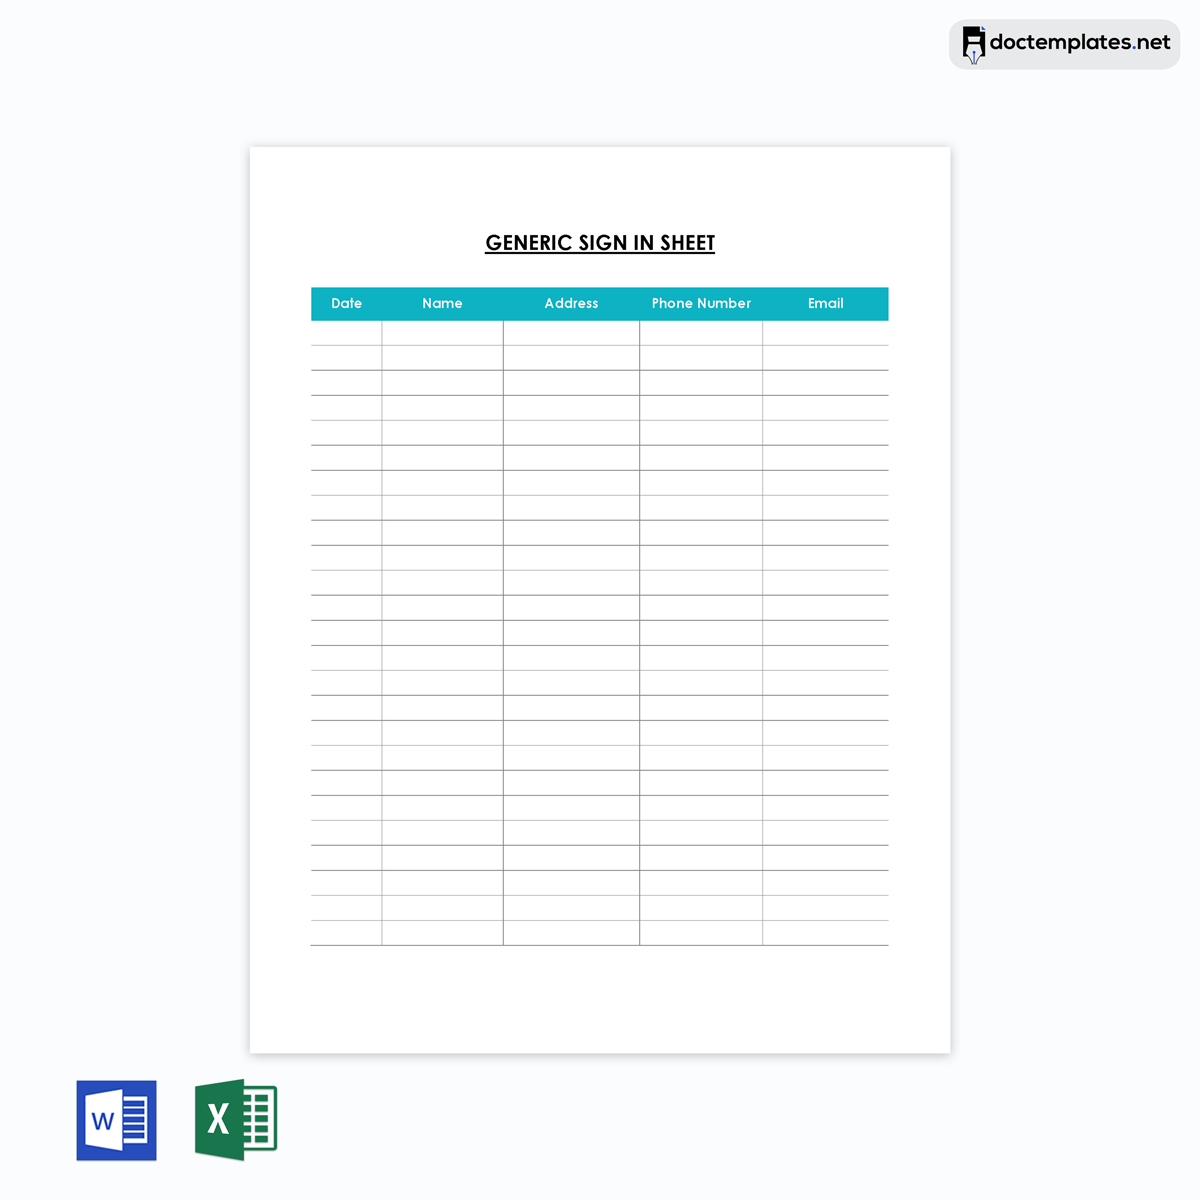 Sign in sheet template